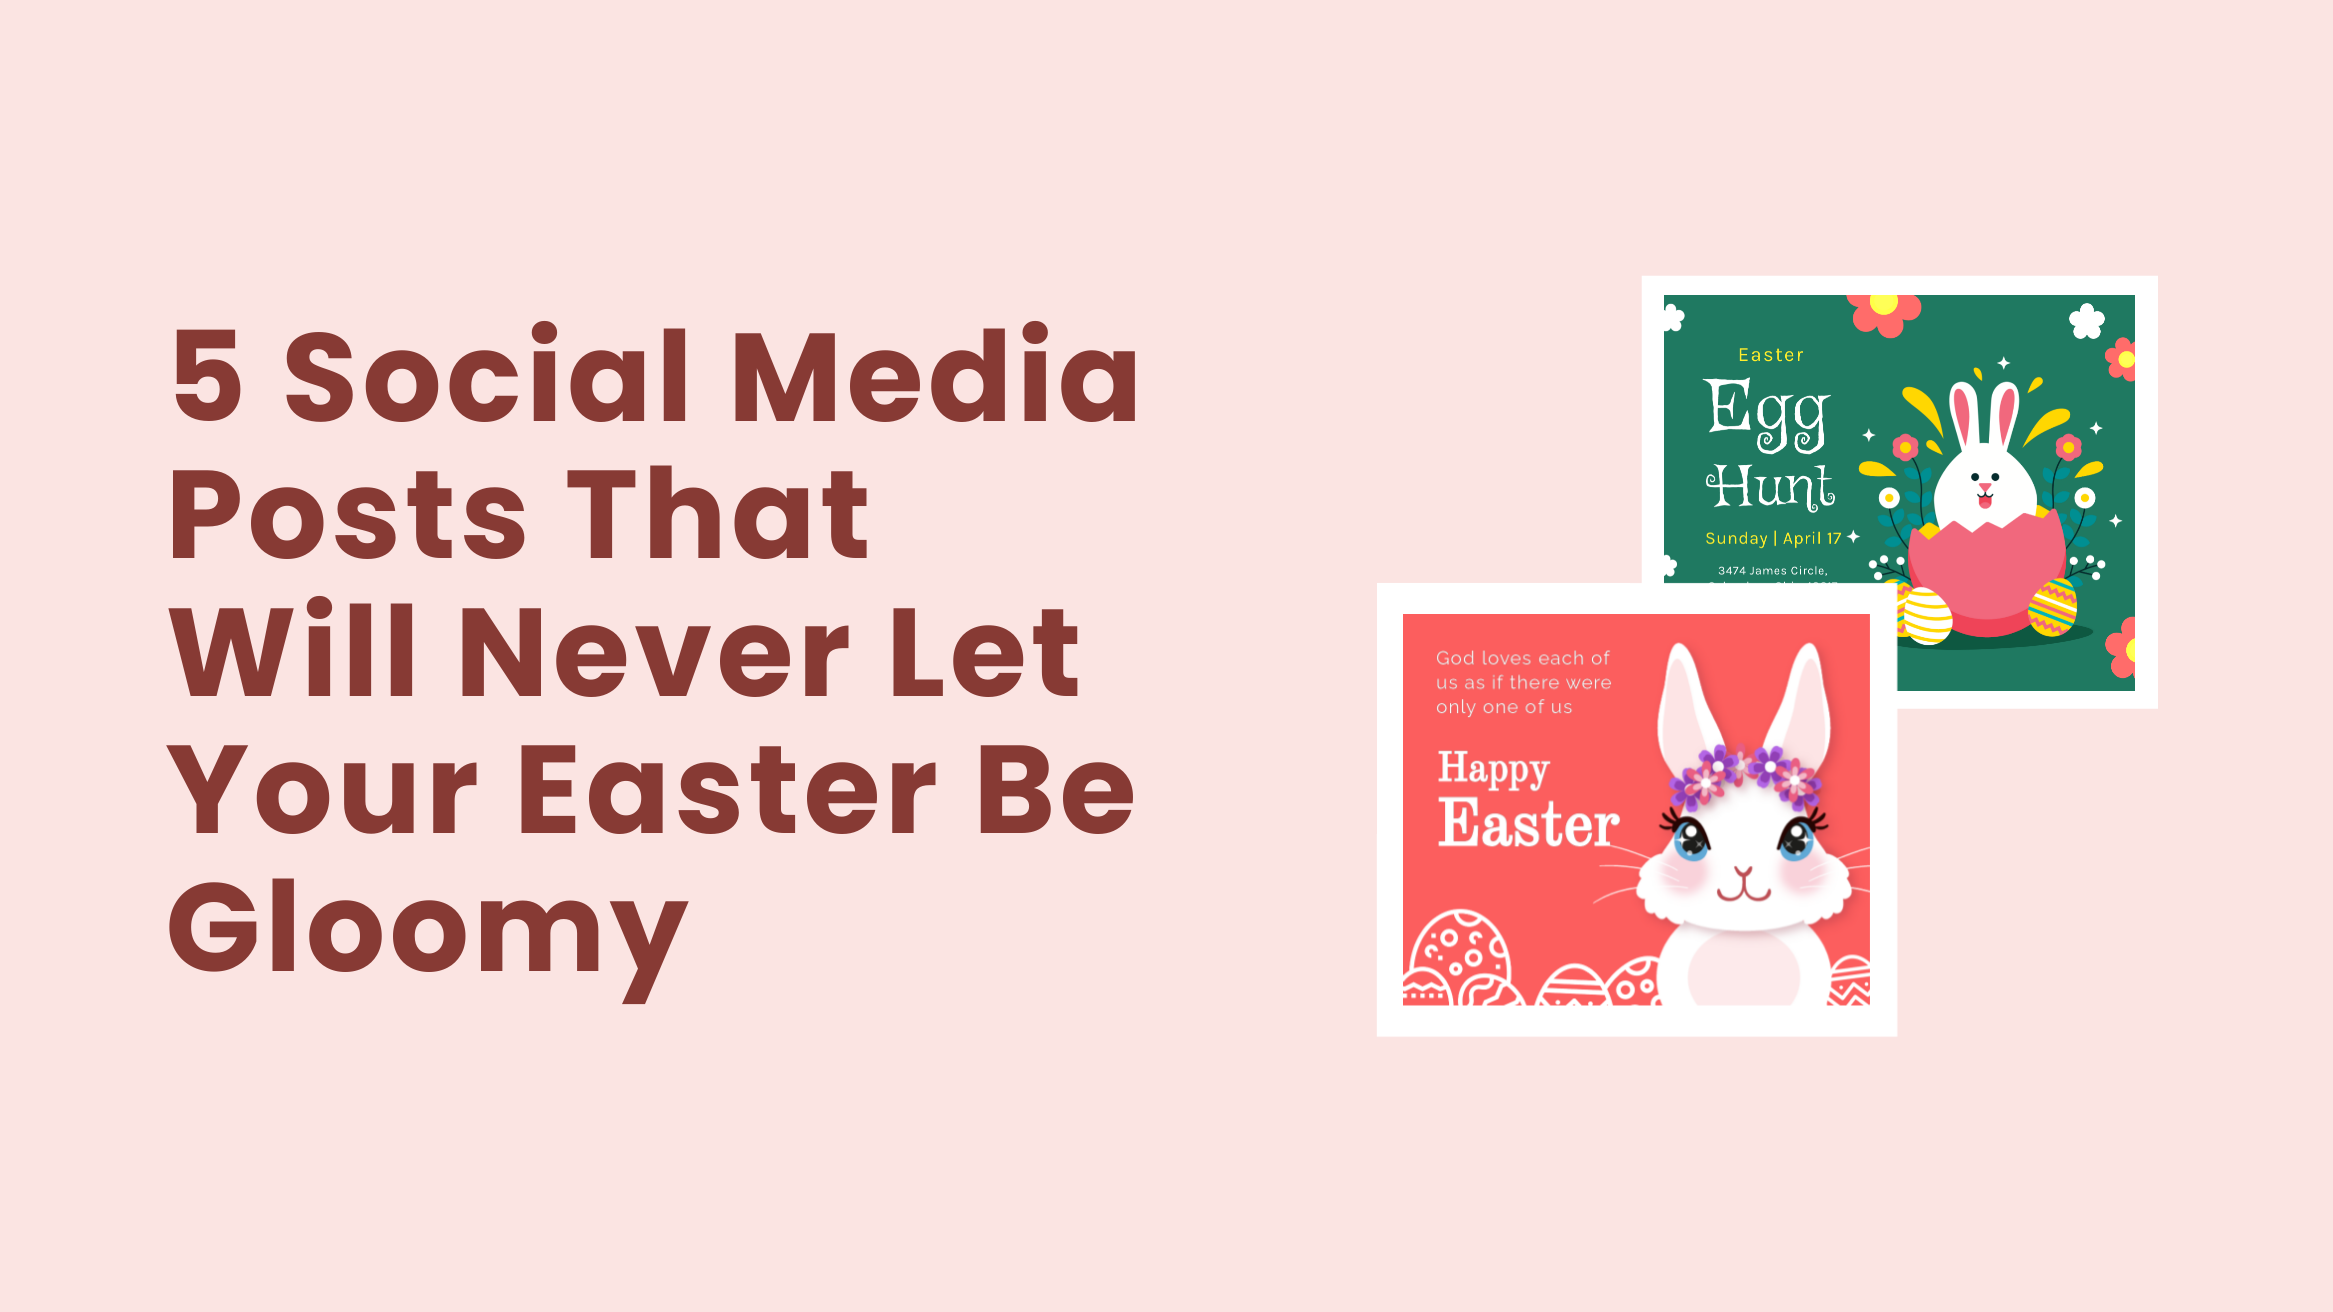 5 Social Media Posts That Will Never Let Your Easter Be Gloomy